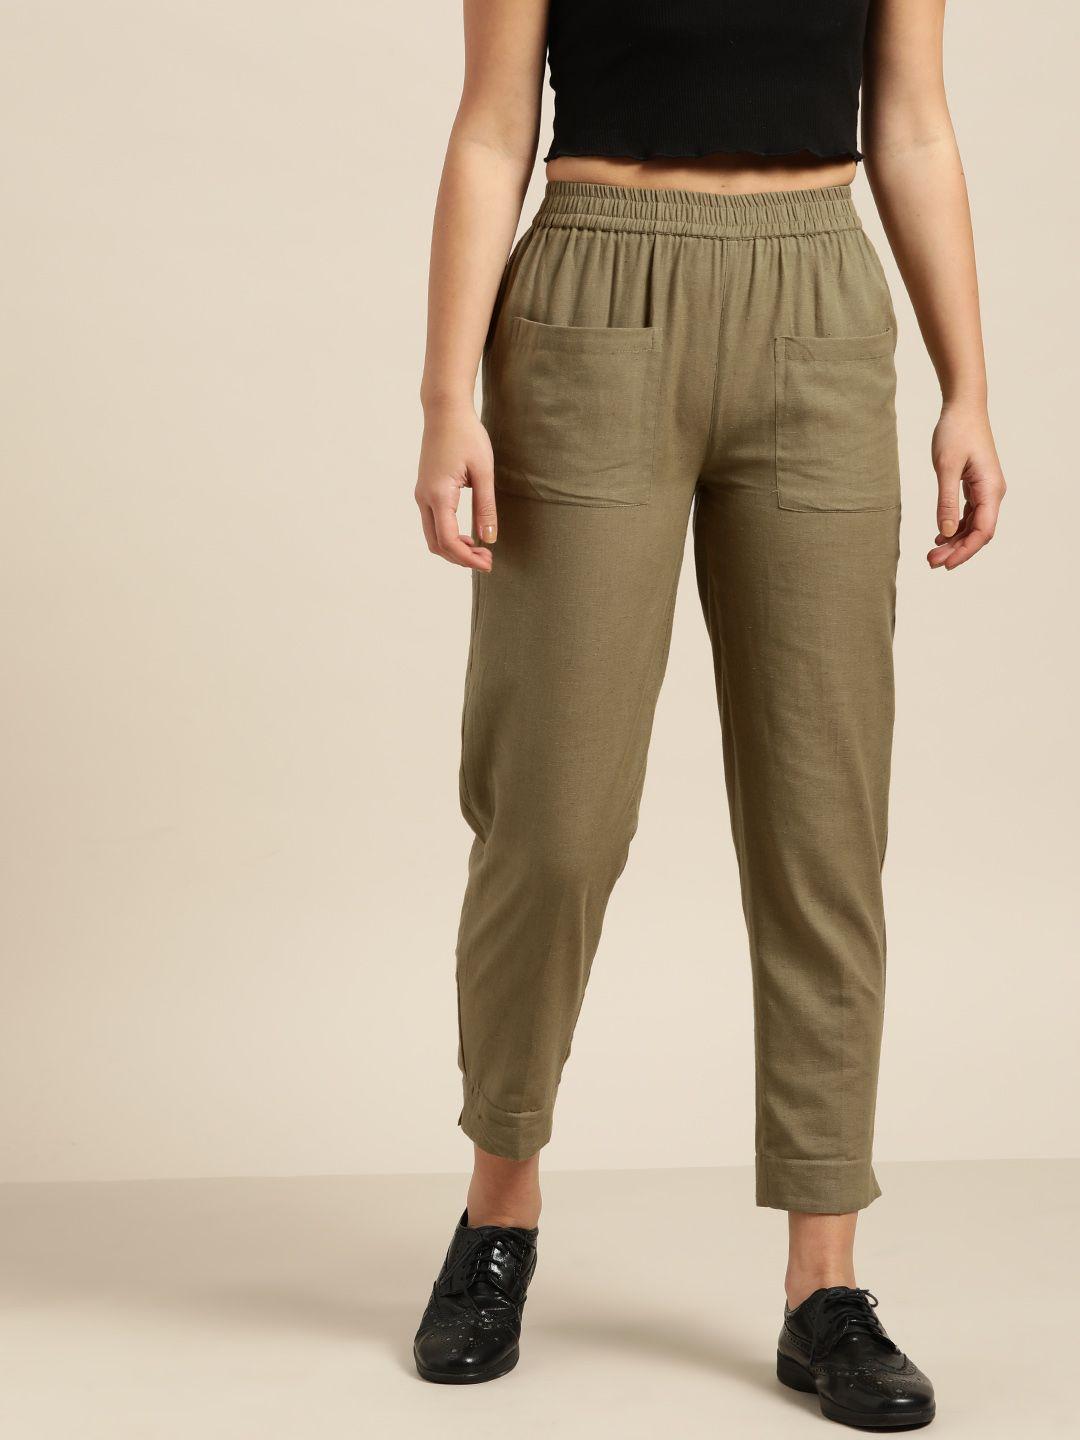 shae-by-sassafras-women-olive-green-tapered-fit-trousers